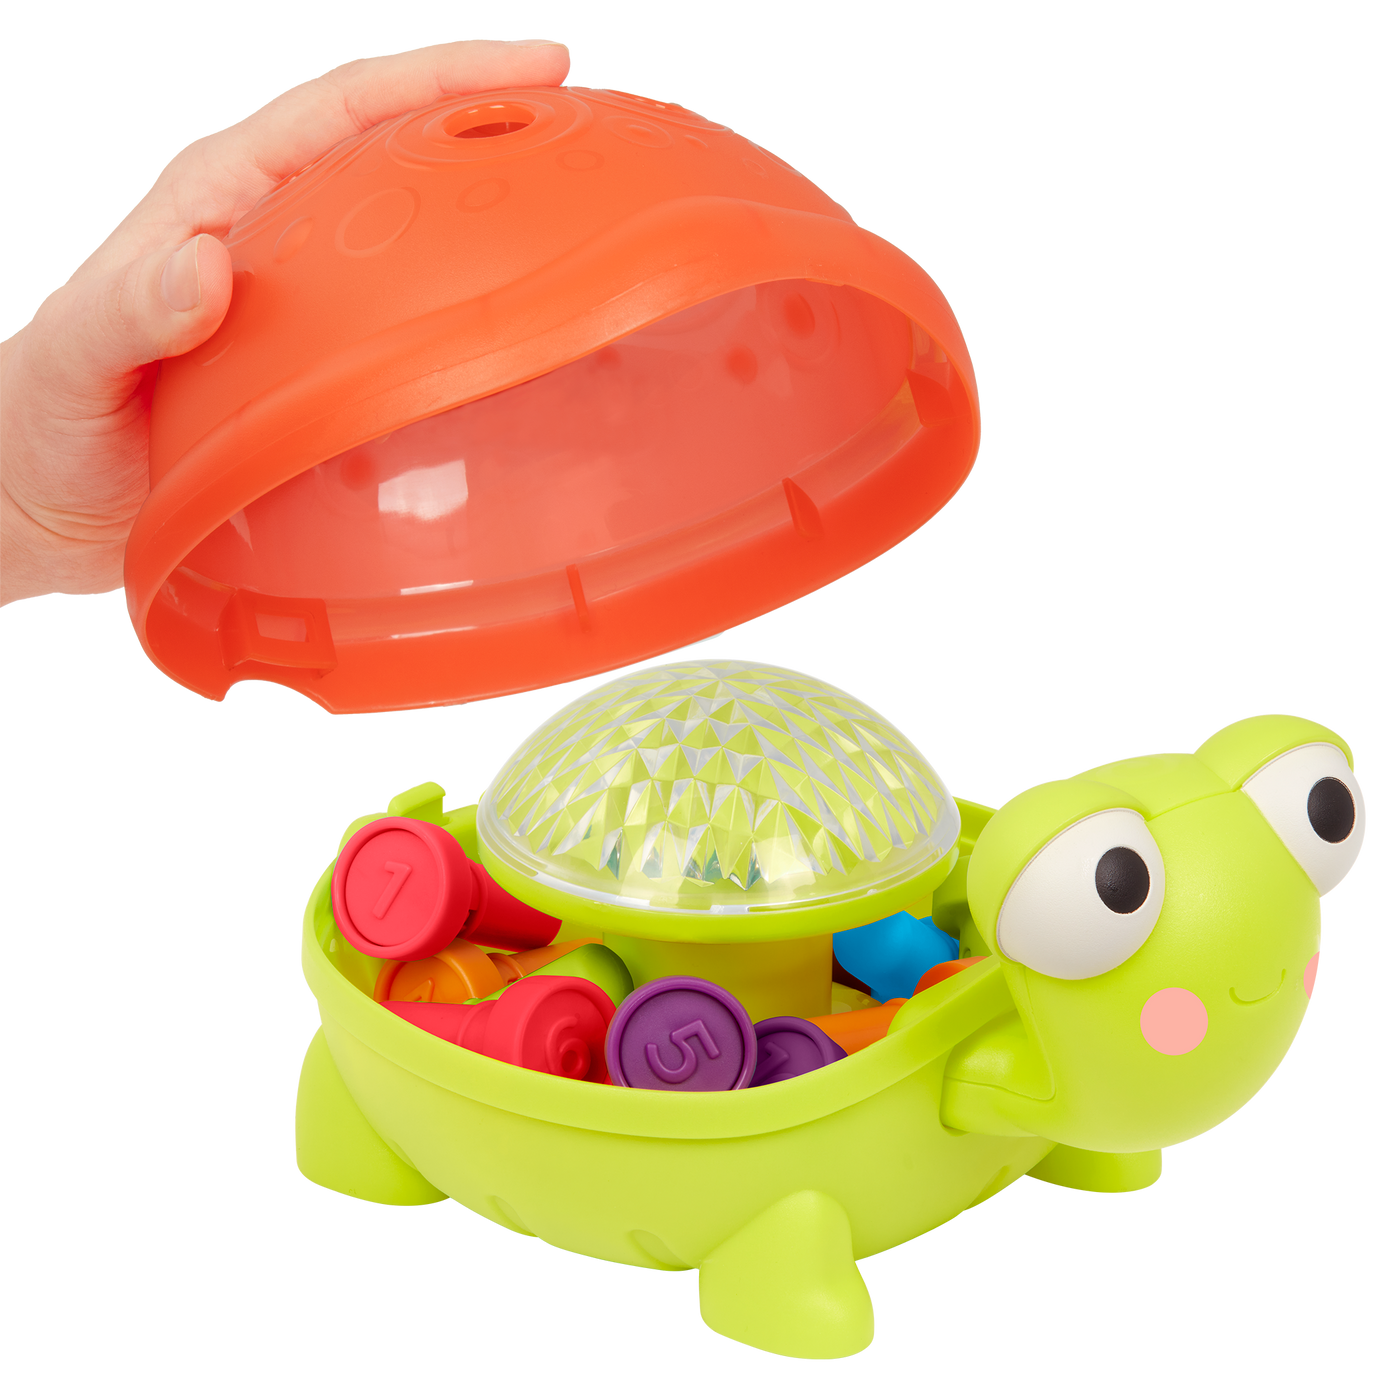 Light-up turtle counting toy.